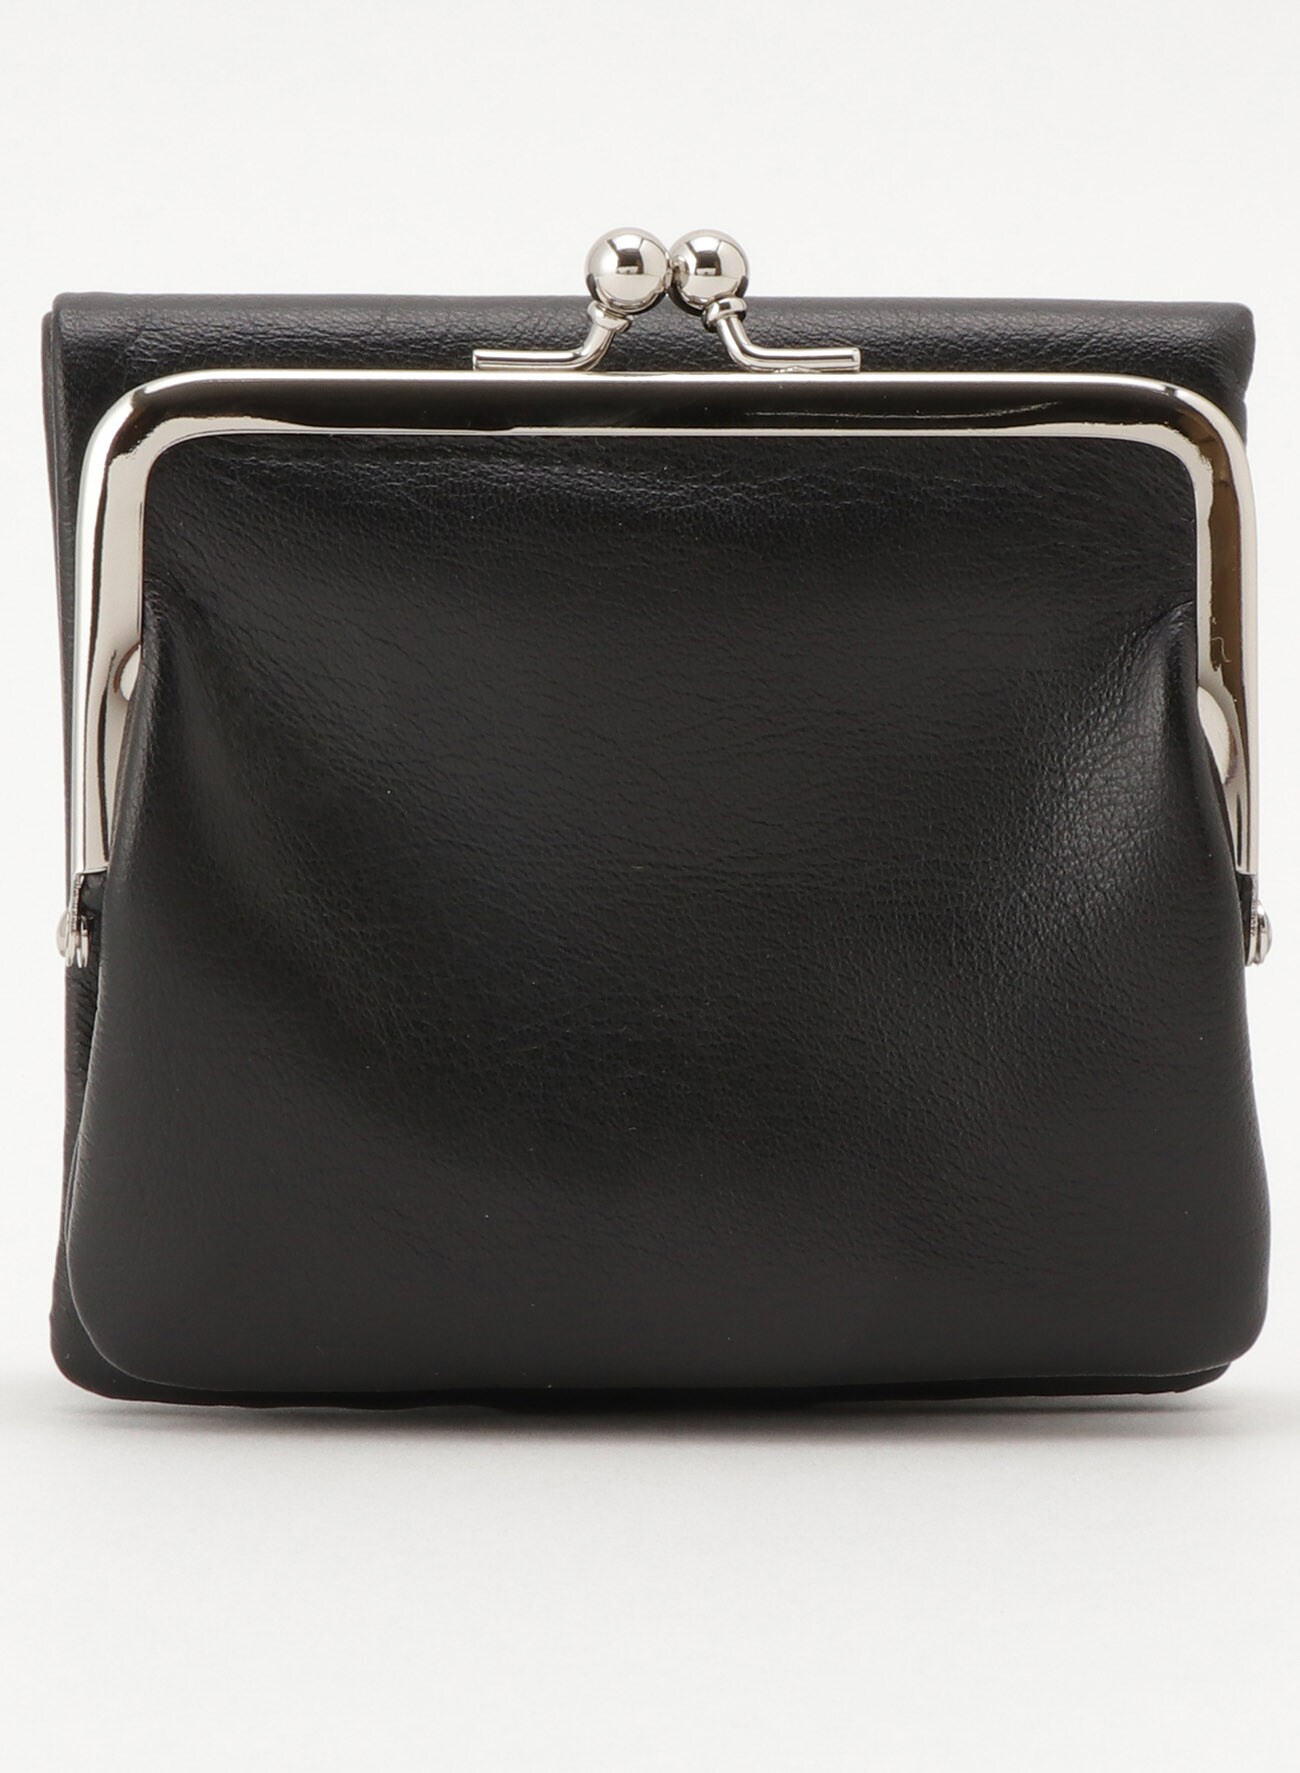 SMOOTH SOFT LEATHER PLUMP SMALL WALLET